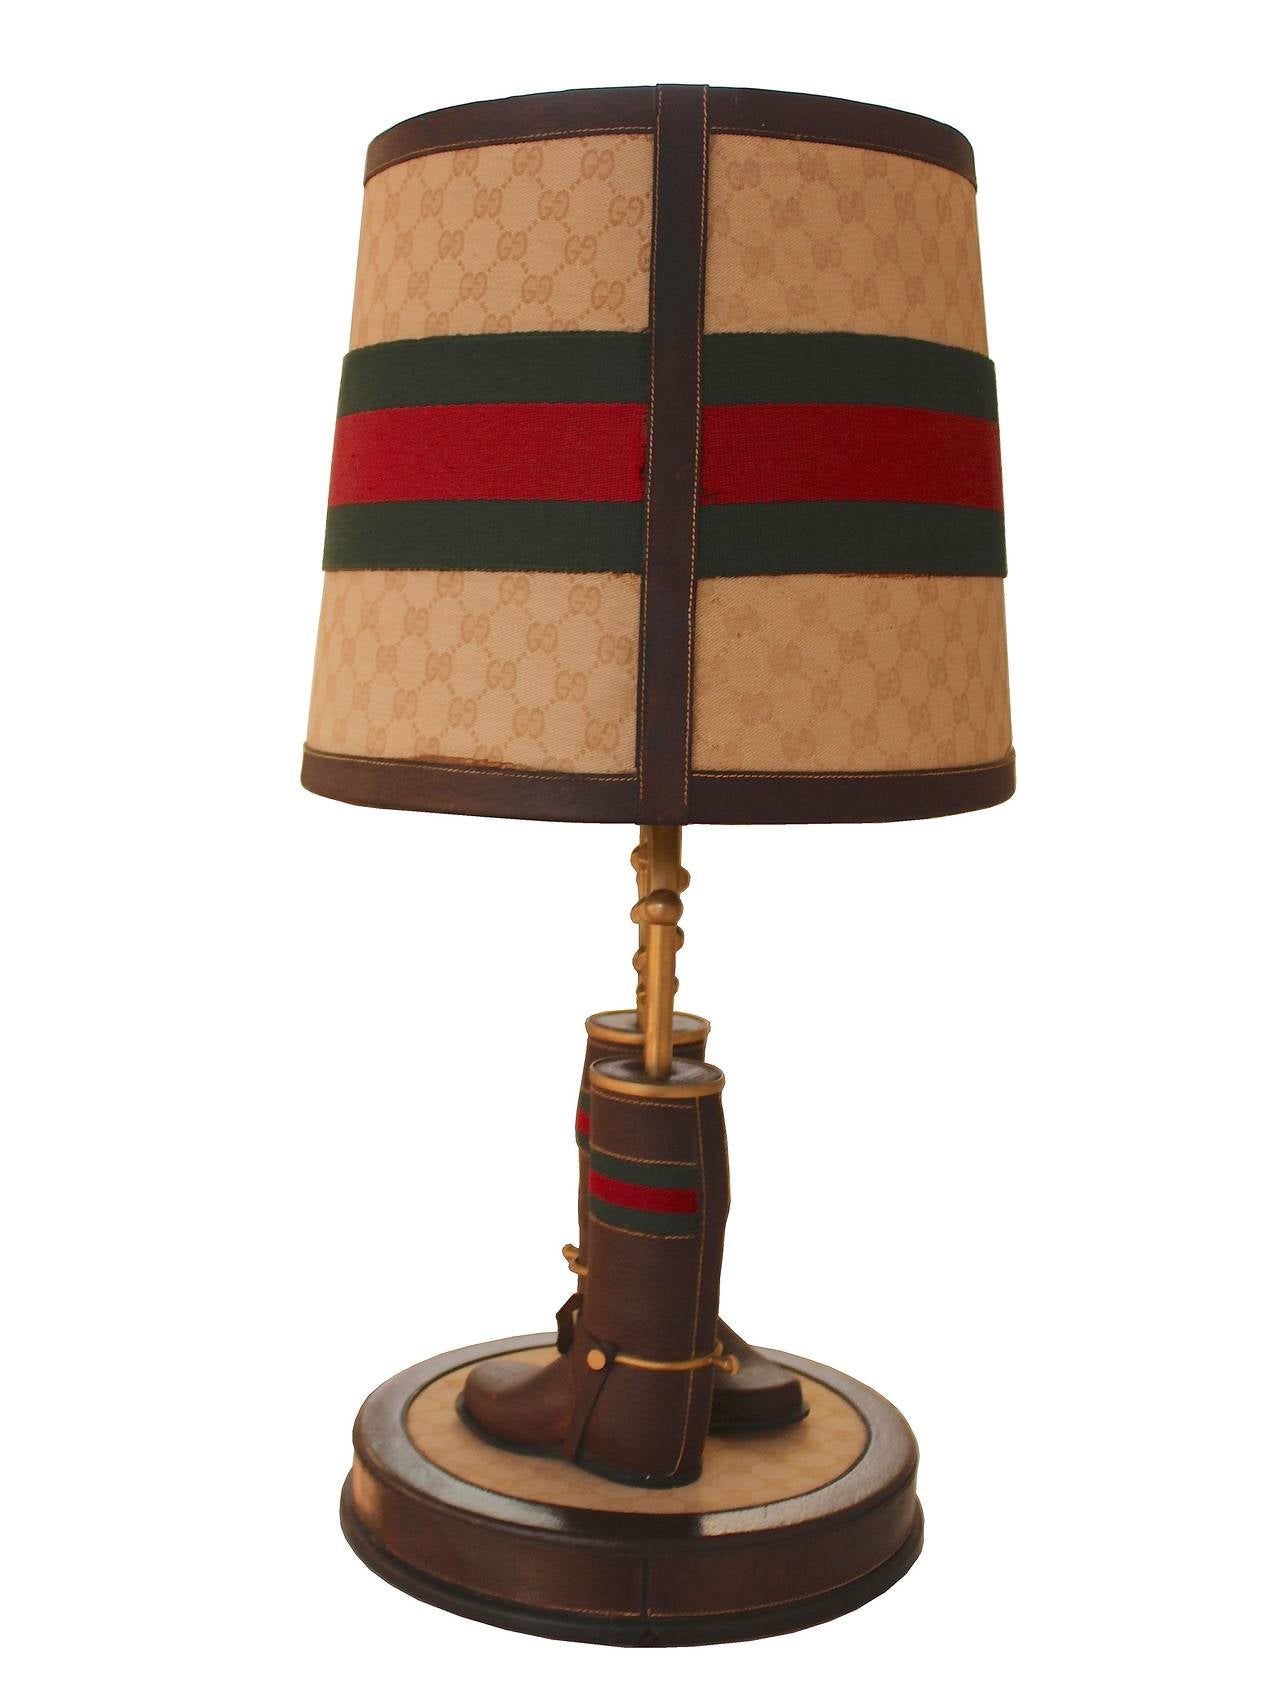 Rare table lamp by Gucci with horseshoe and boots with stirrups.
Gilt metal, leather, webbing and Gucci monogrammed fabric. These lamps were possibly not for retail but part of the display in the Gucci boutiques.
There is one in the collection of